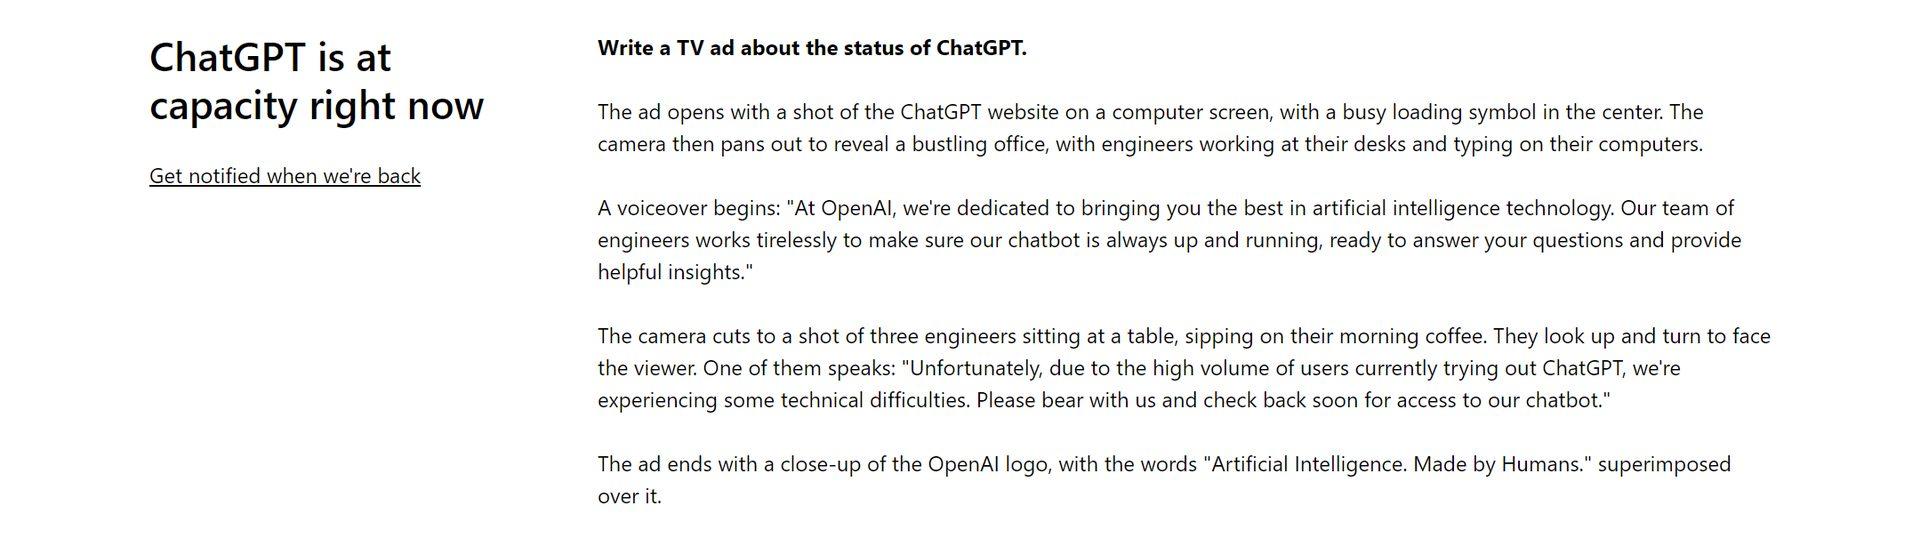 chat GPT example 